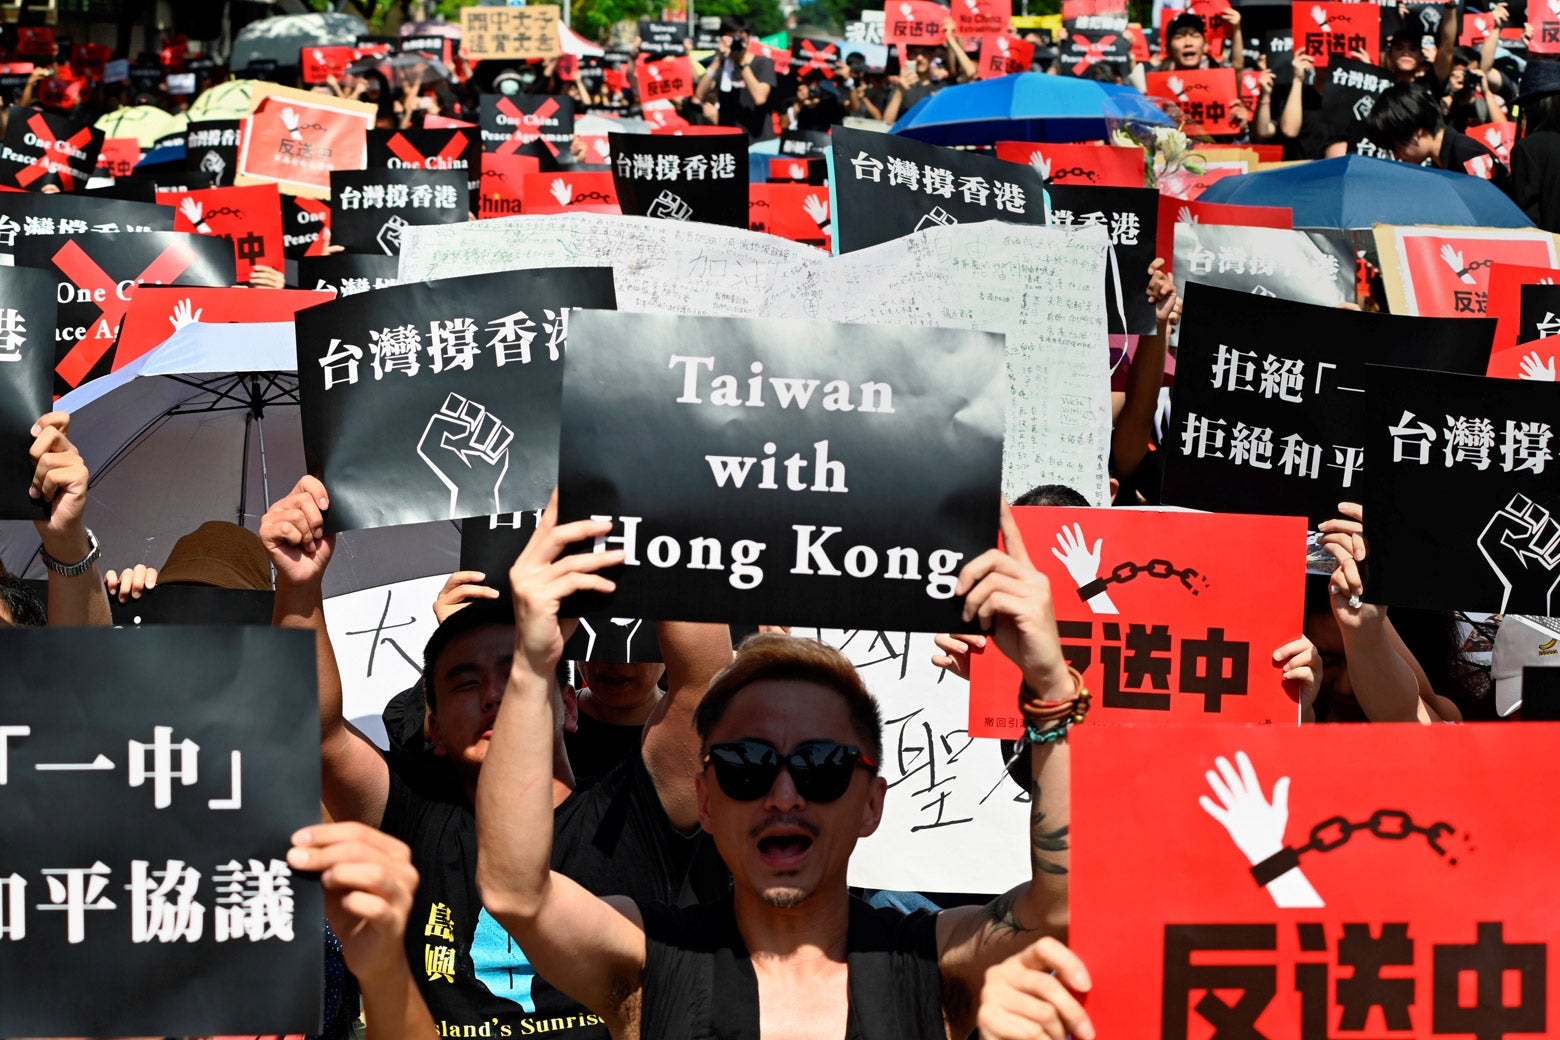 Protesters display placards during a demonstration in Taipei on Sunday in support of the continuing protests taking place in Hong Kong.